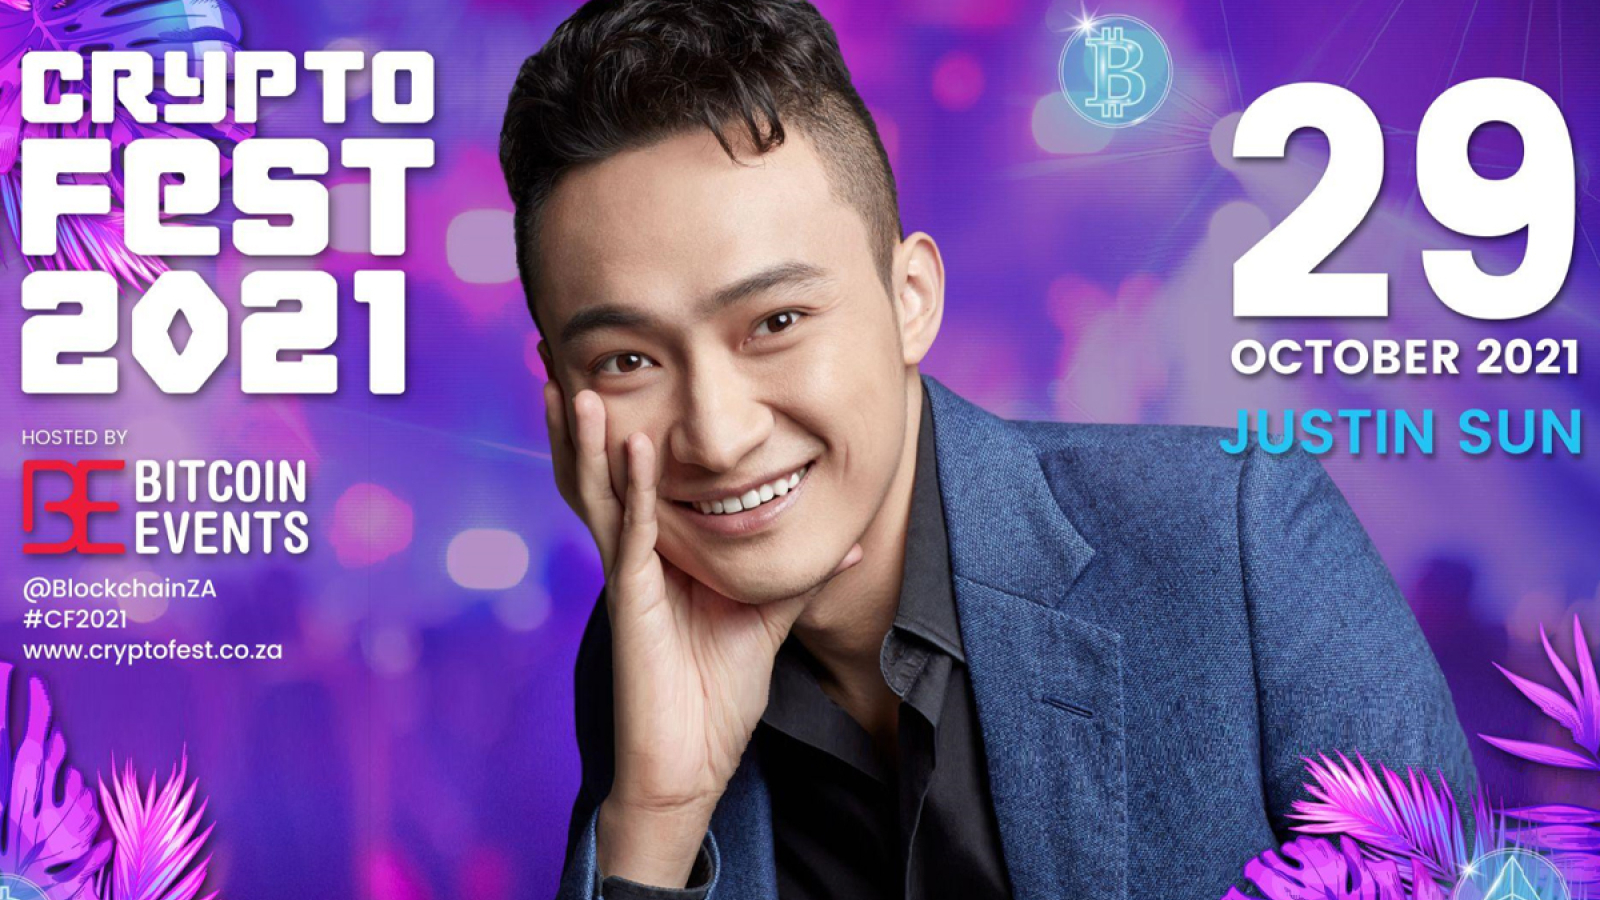 Bitcoin Events Confirms Crypto Whiz Kid Justin Sun as Keynote Speaker at Crypto Fest 2021